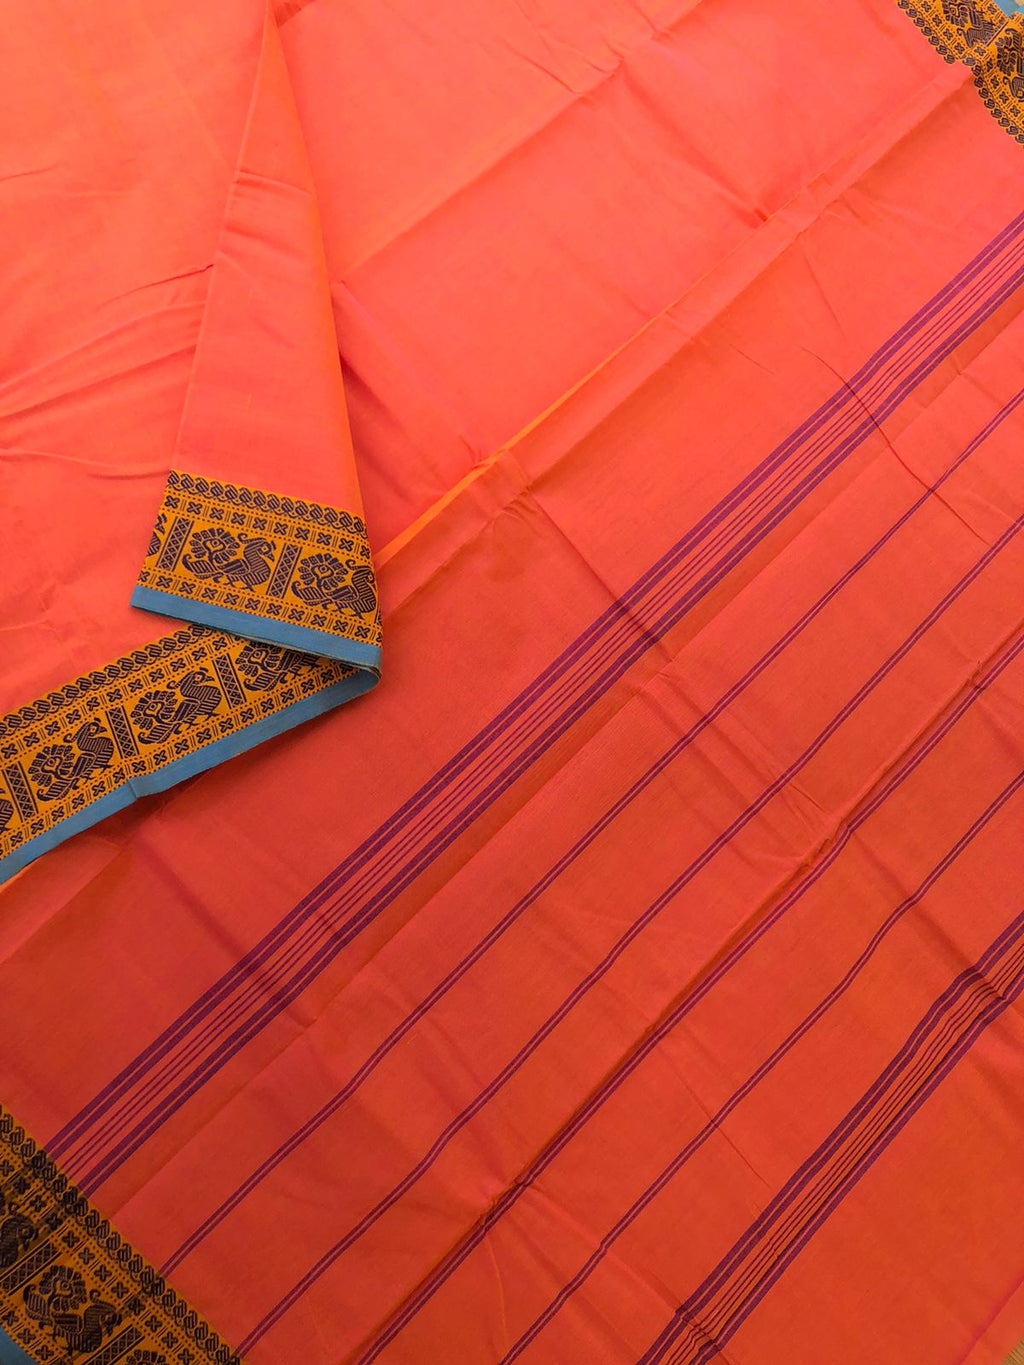 Classic Chettinad - peach yellow woven with annapakshi borders